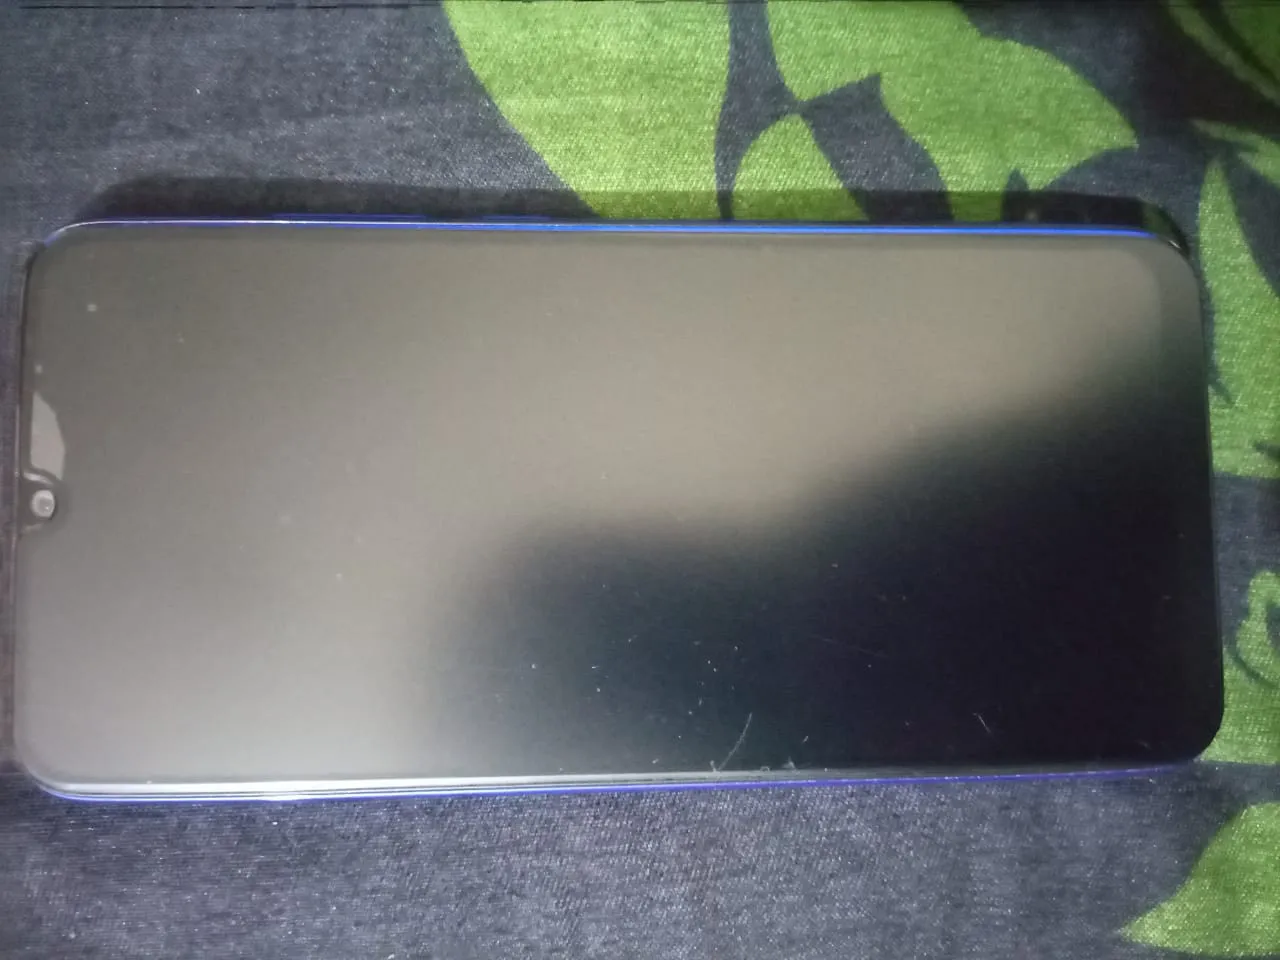 Remdi note 8 for sale very good condition - photo 1